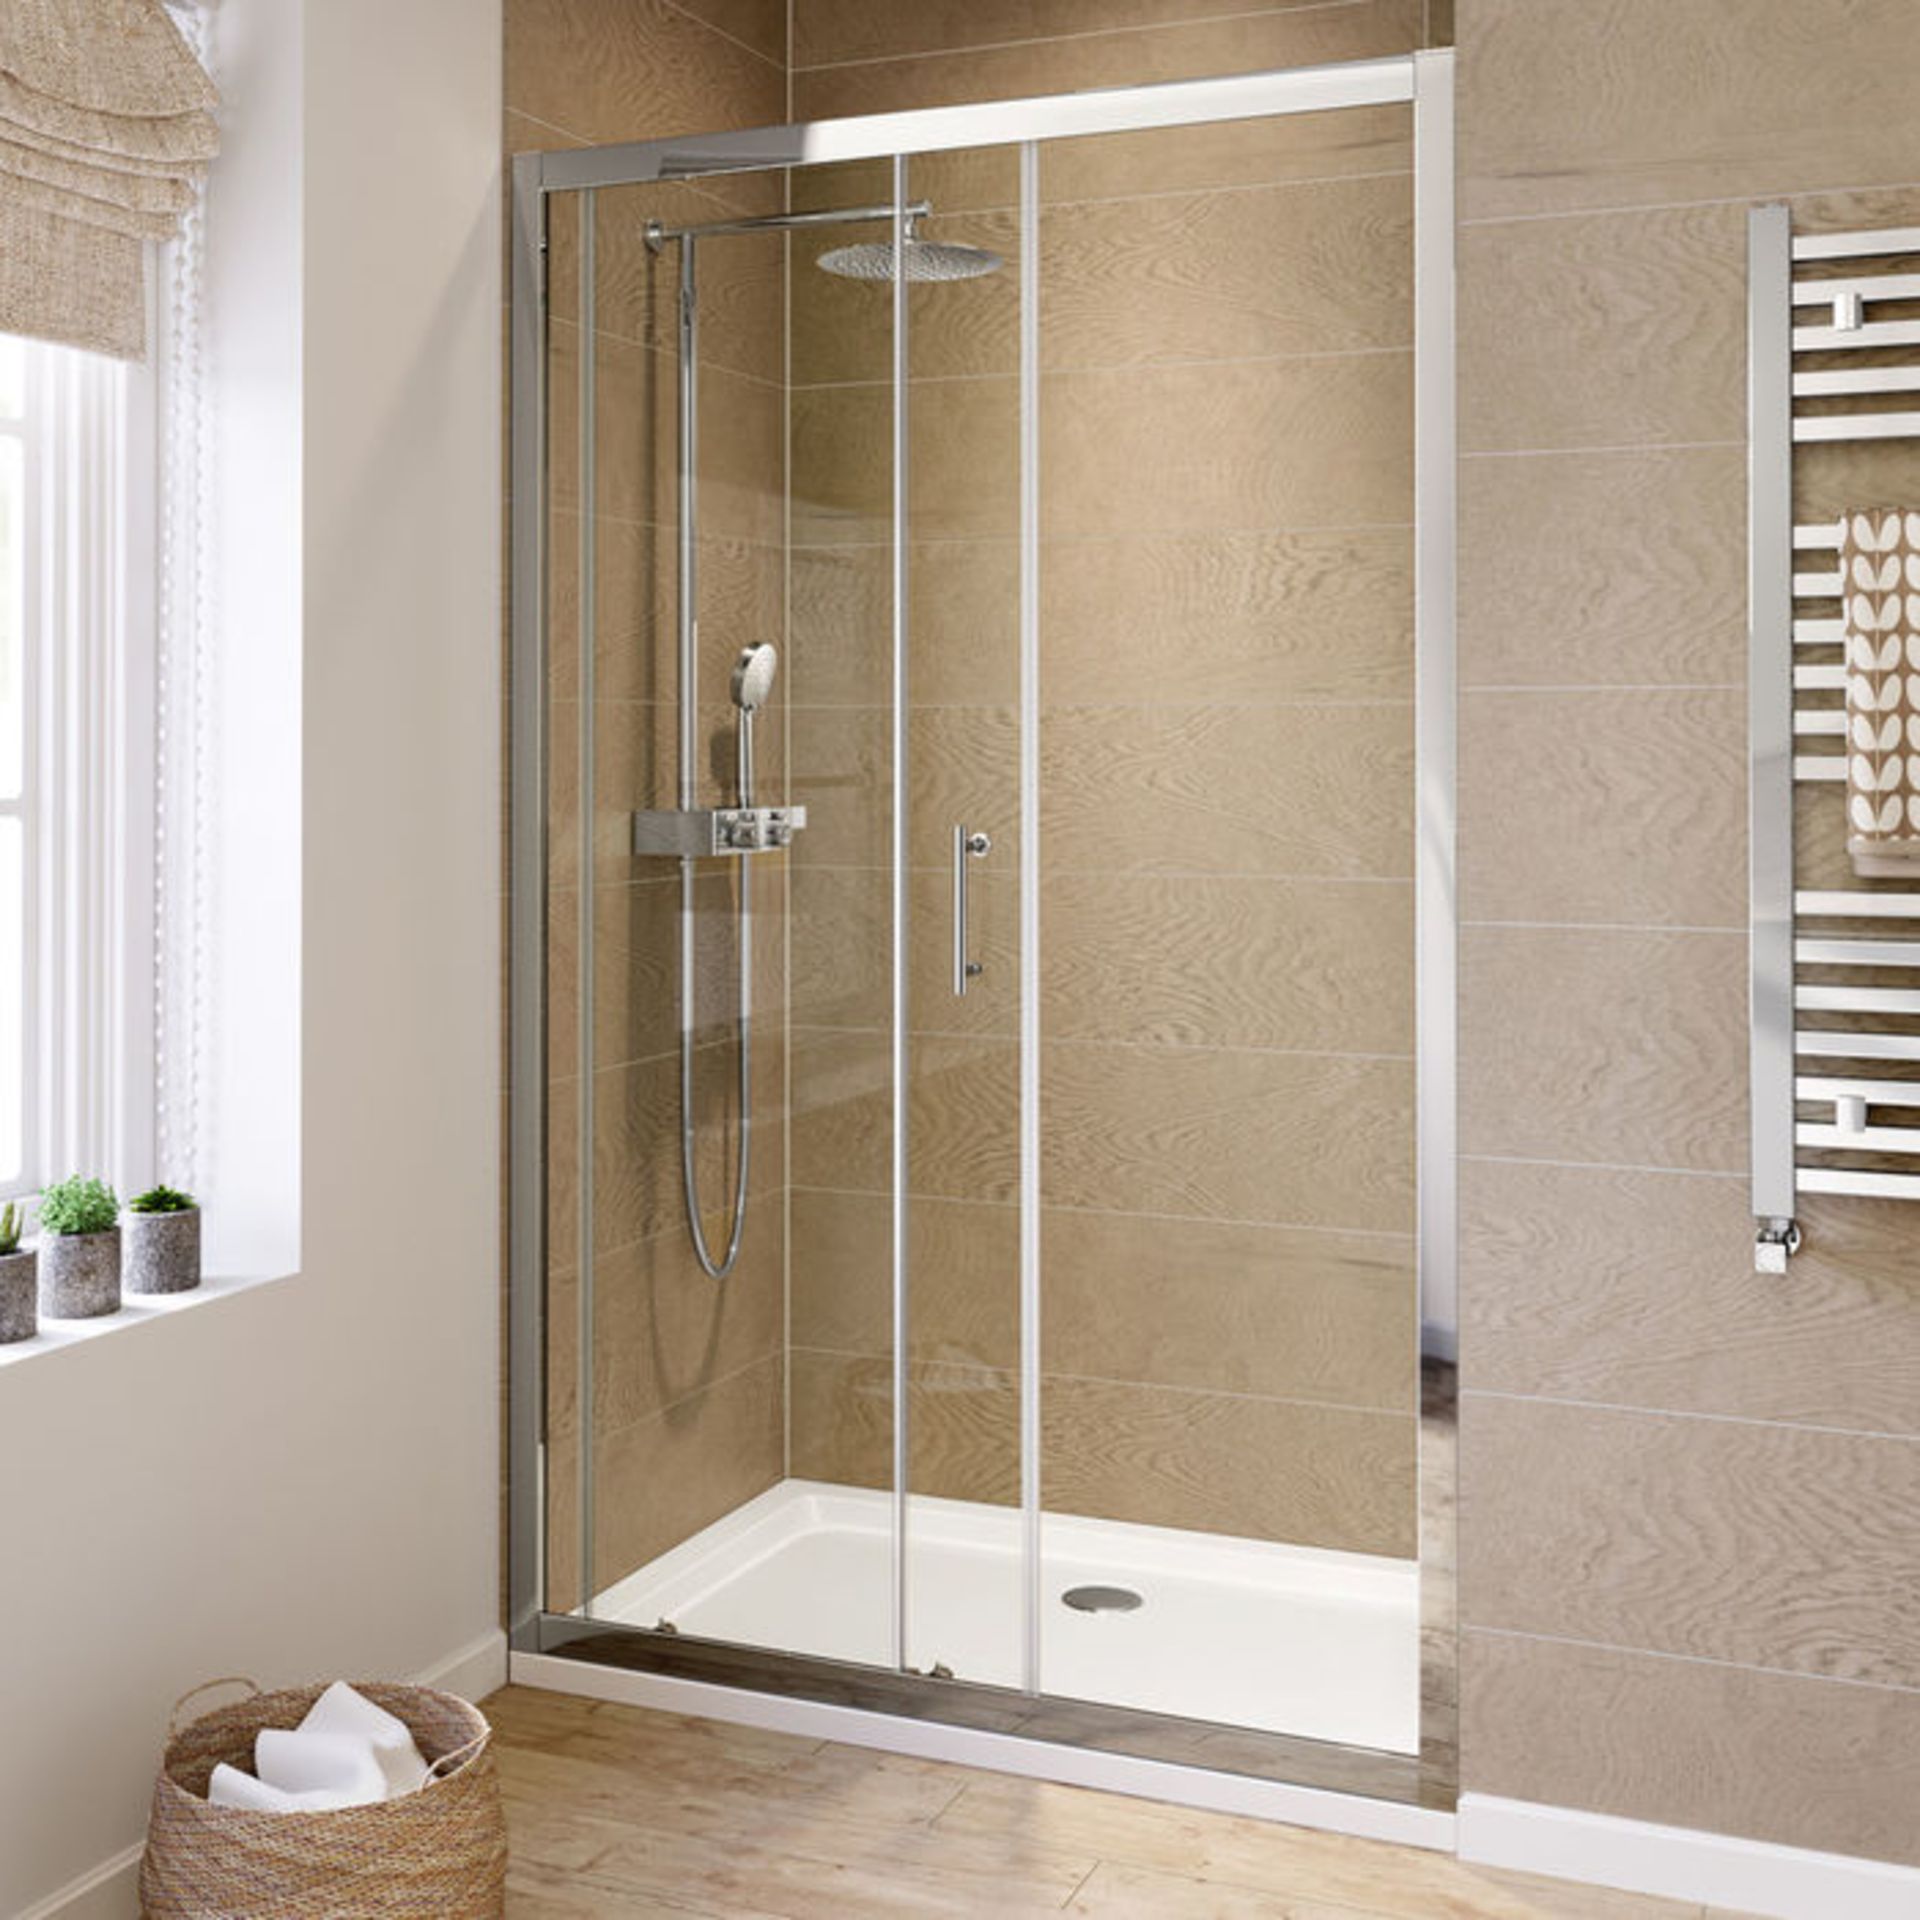 (HS26) 1200mm - 6mm - Elements Sliding Shower Door. RRP £299.99. 6mm Safety Glass Fully waterproof